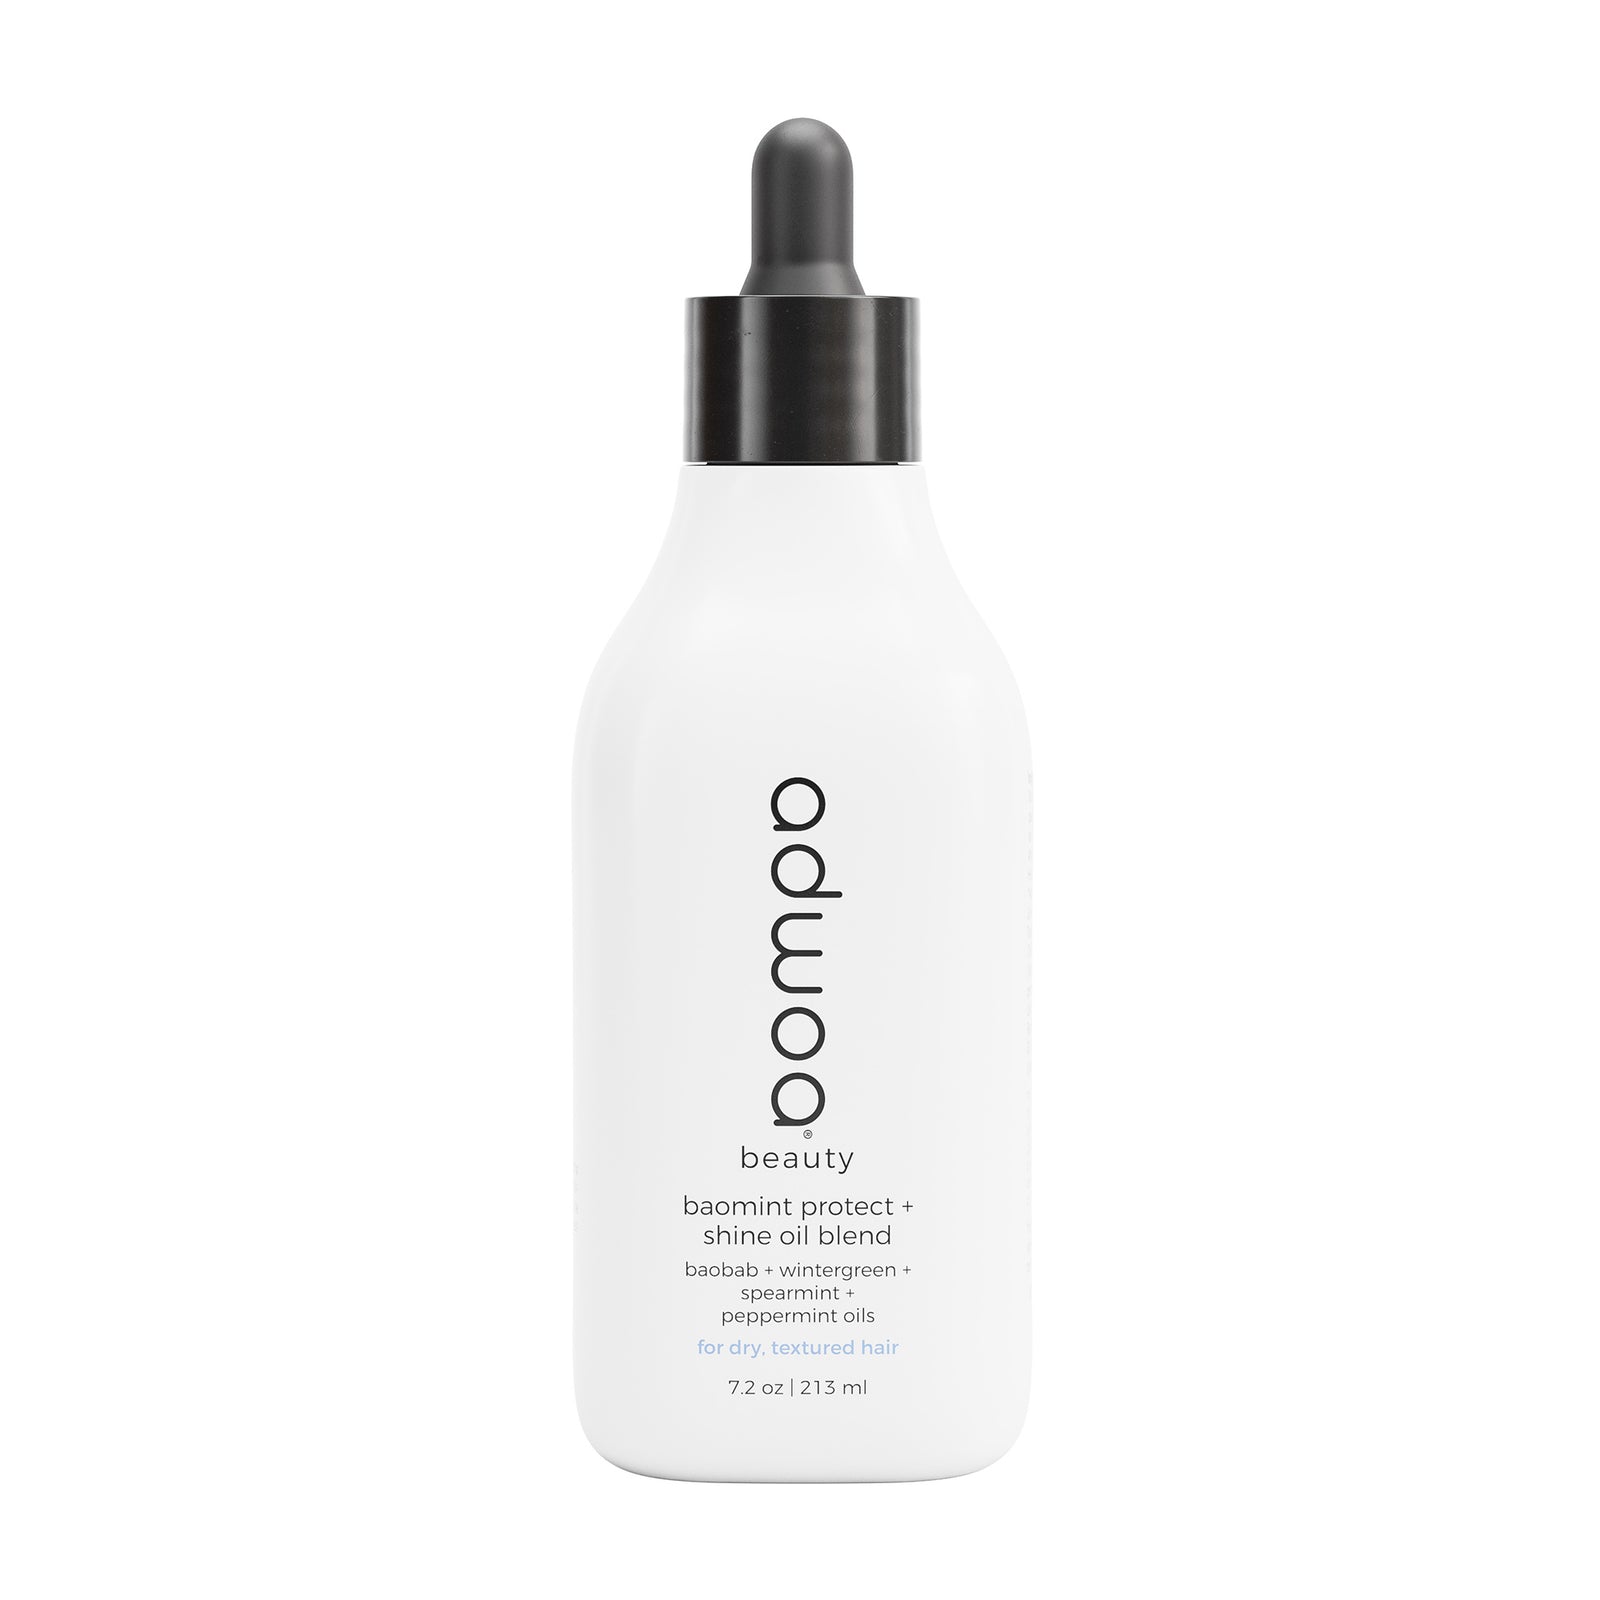 Plant-based oil made to seal in moisture for softer skin and healthy, shiny  hair!